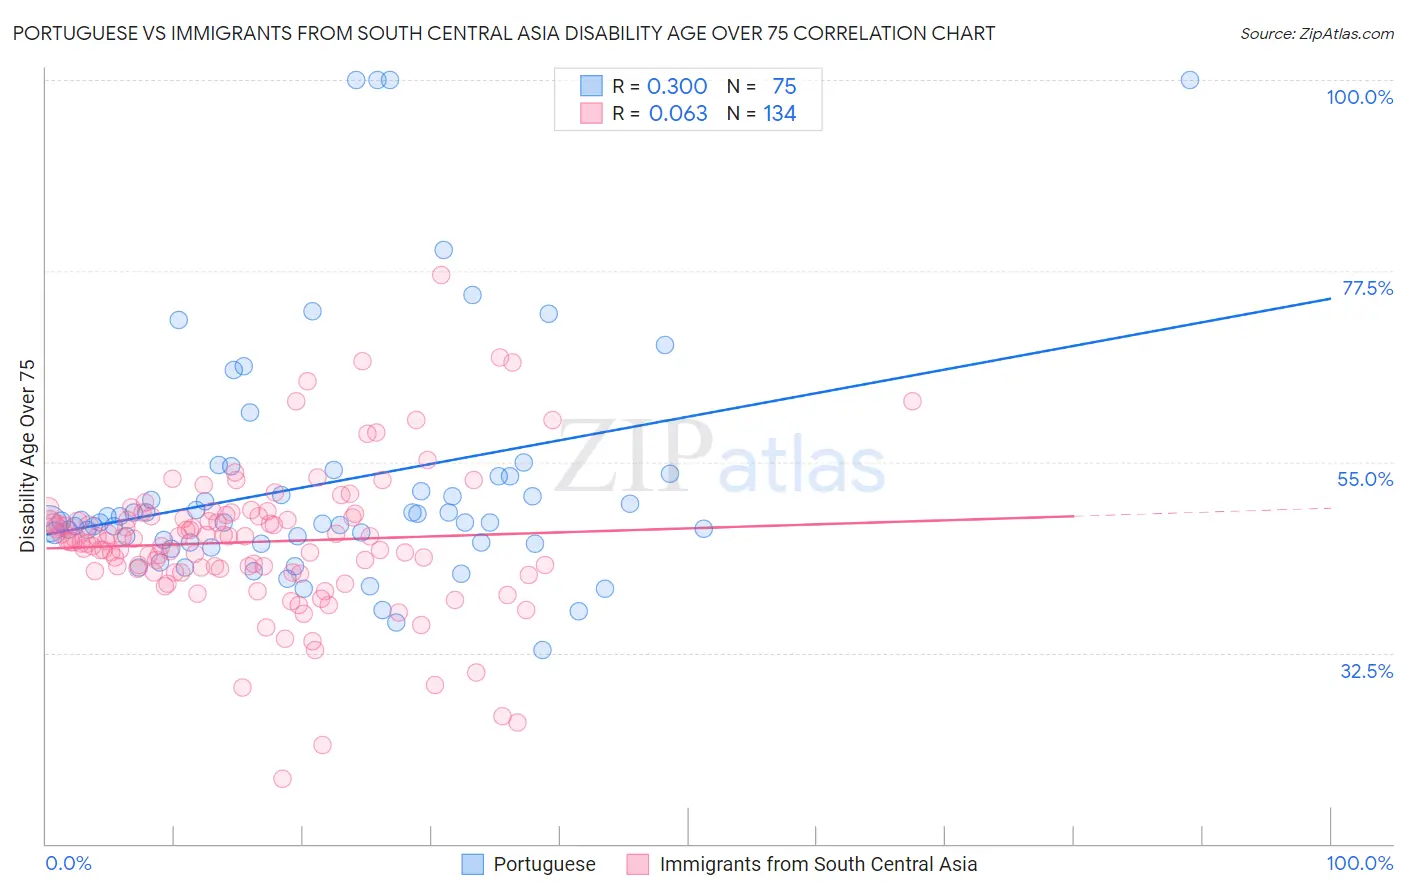 Portuguese vs Immigrants from South Central Asia Disability Age Over 75